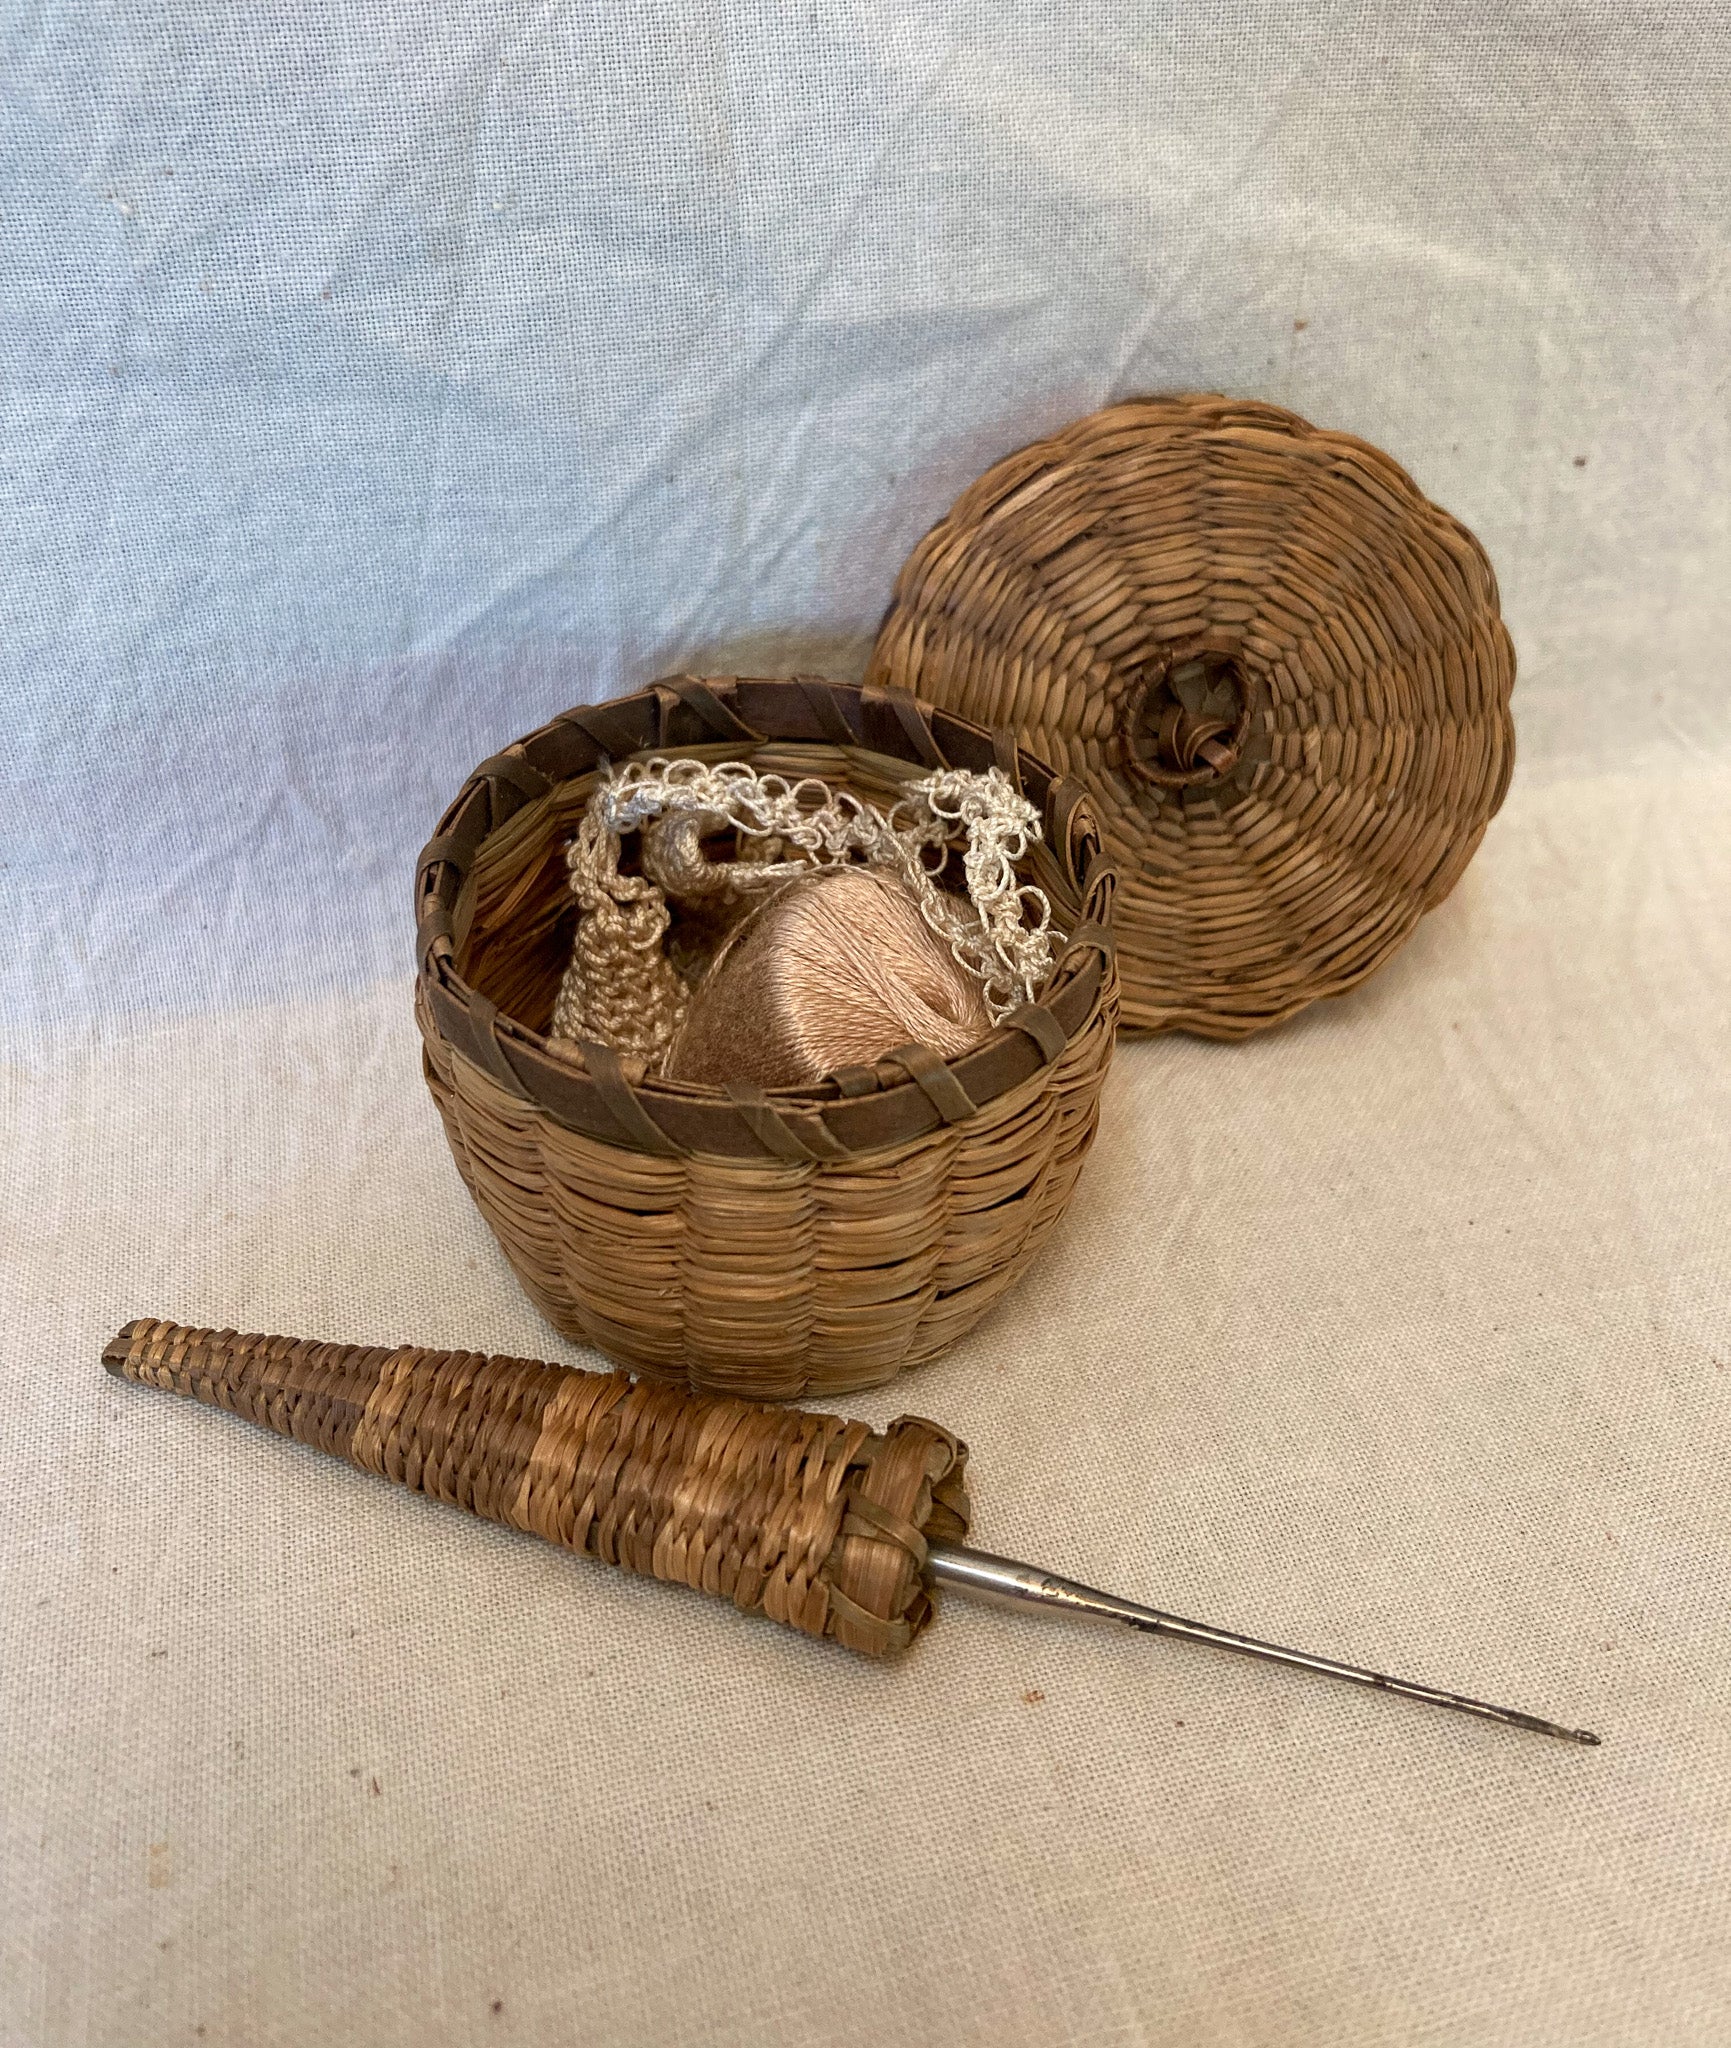 1910’s Tiny Woven Sweet Grass Basket and Crochet Hook Holder with Contents